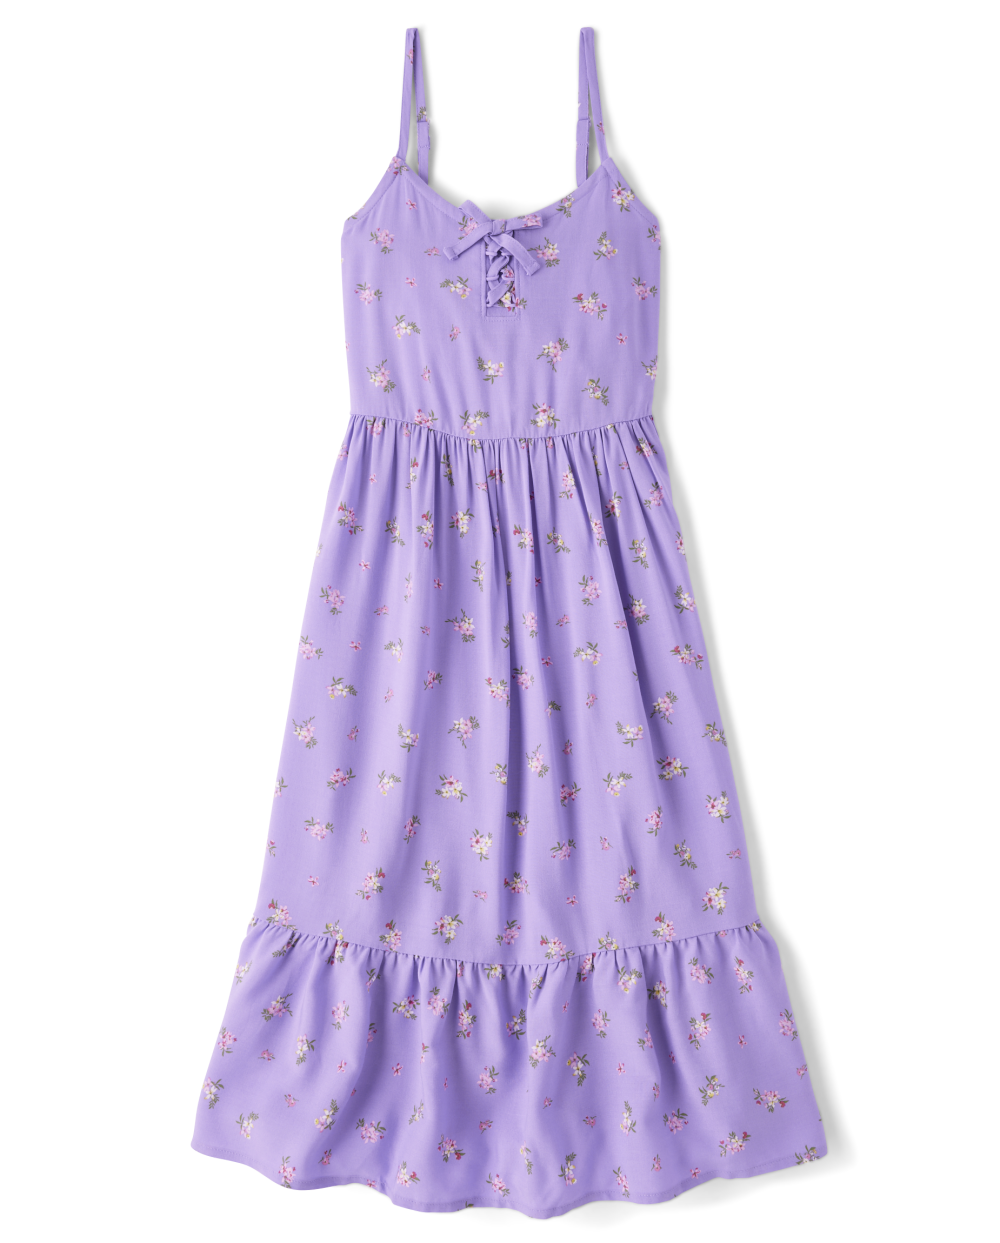 Girls V-neck Rayon Lace-Up Smocked Floral Print Sleeveless Maxi Dress With a Bow(s) and Ruffles